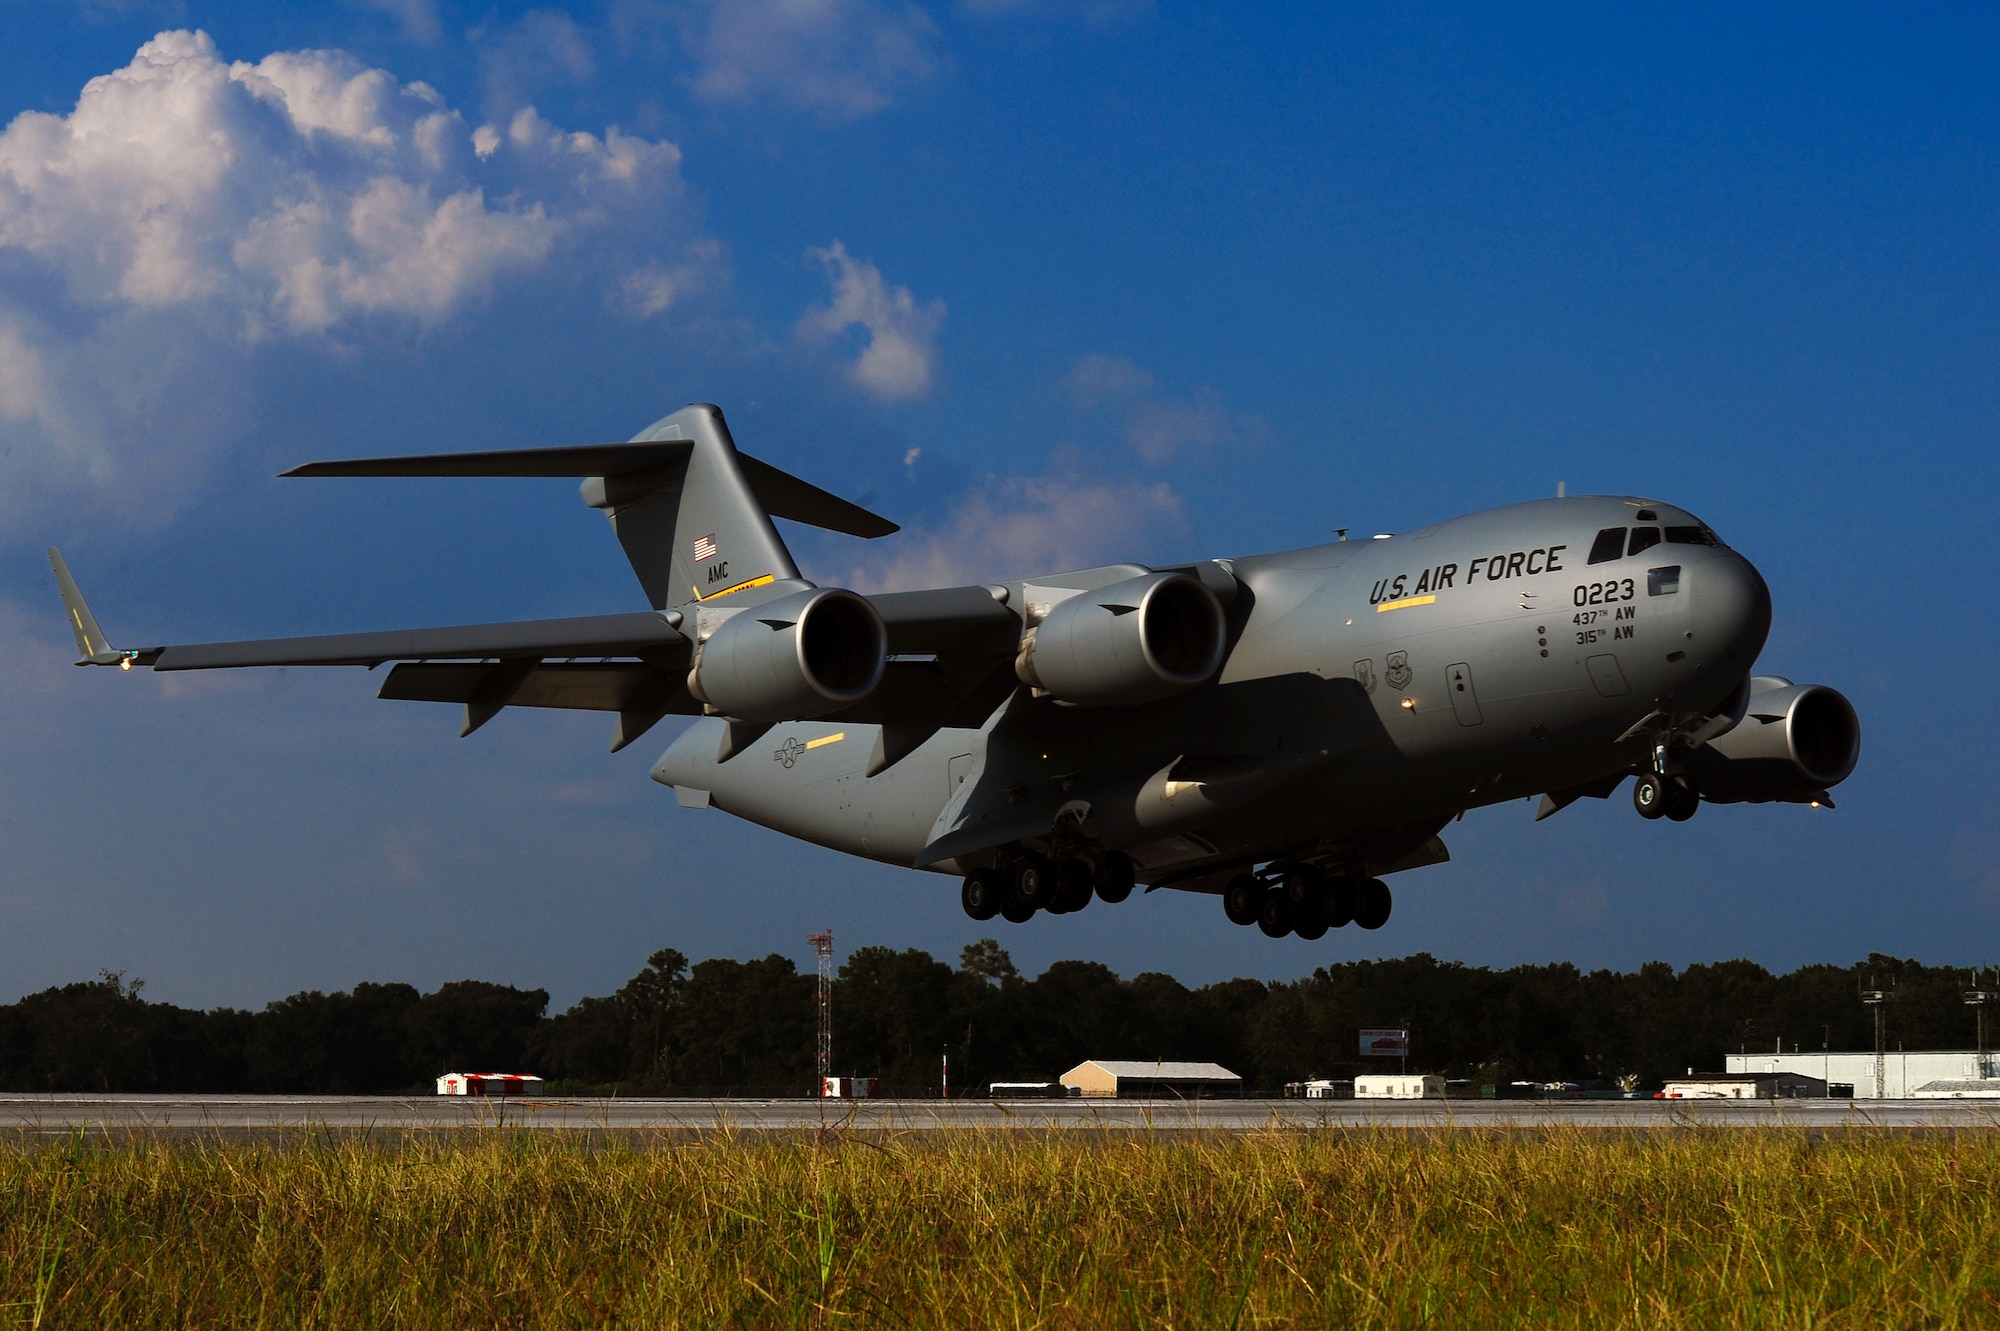 Joint Base Charleston received the last U.S. Air Force C-17 Globemaster III, P-223, during a delivery ceremony Sept. 12, 2013, on the flight line at Joint Base Charleston - Air Base, S.C. This historical event comes more than 20 years after the 437th Airlift Wing and the 315th Airlift Wing took delivery of the very first C-17 to enter the Air Force inventory June 14, 1993 and marks the successful completion of C-17 production for the U.S. Air Force. (U.S. Air Force photo/ Airman 1st Class Chacarra Neal)